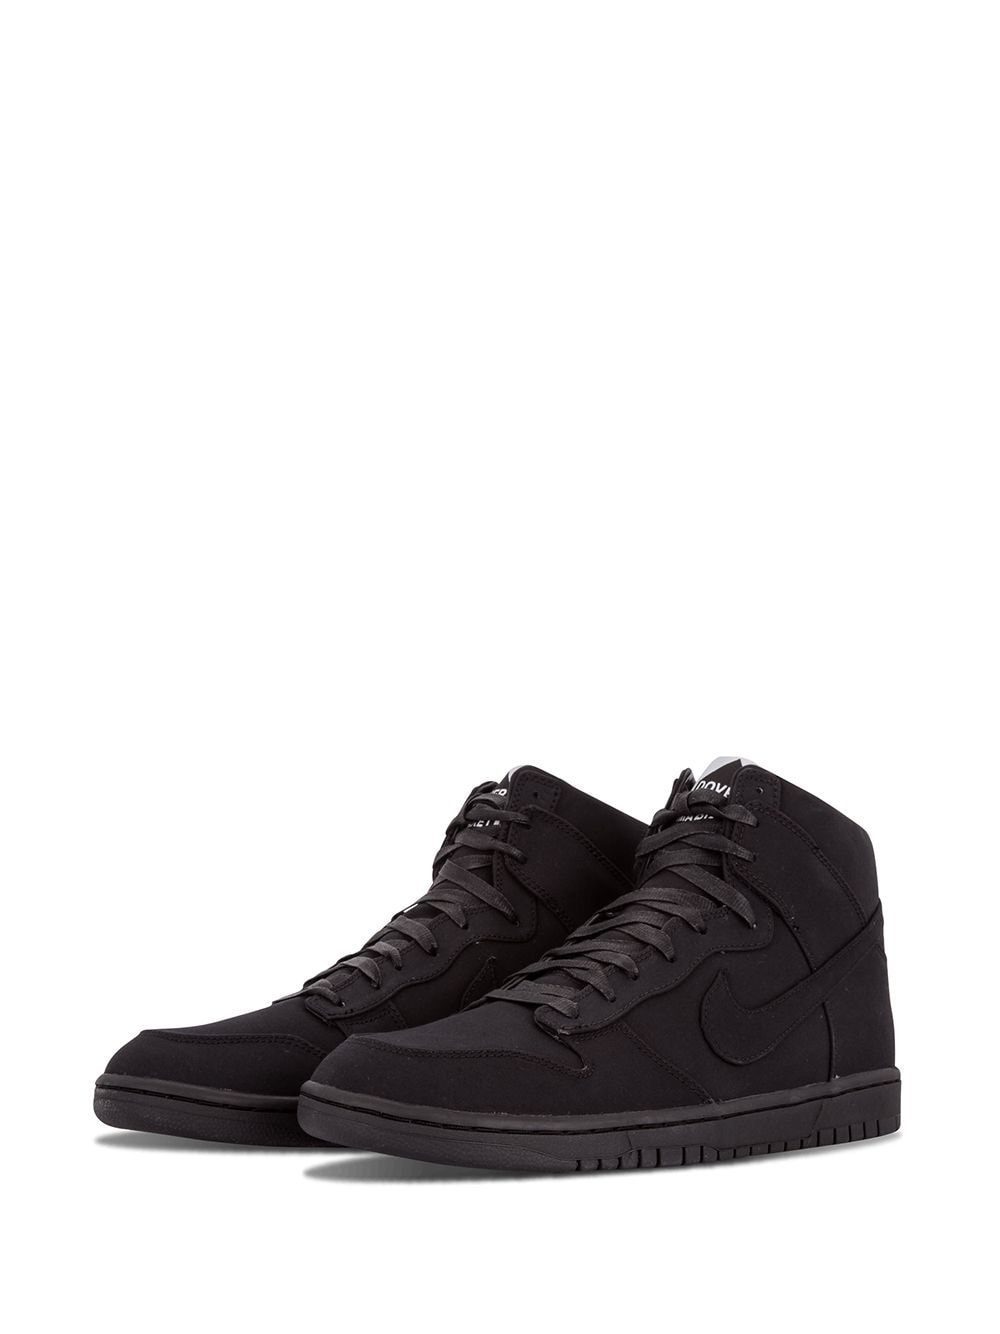 Image 2 of Nike Dunk Lux SP sneakers